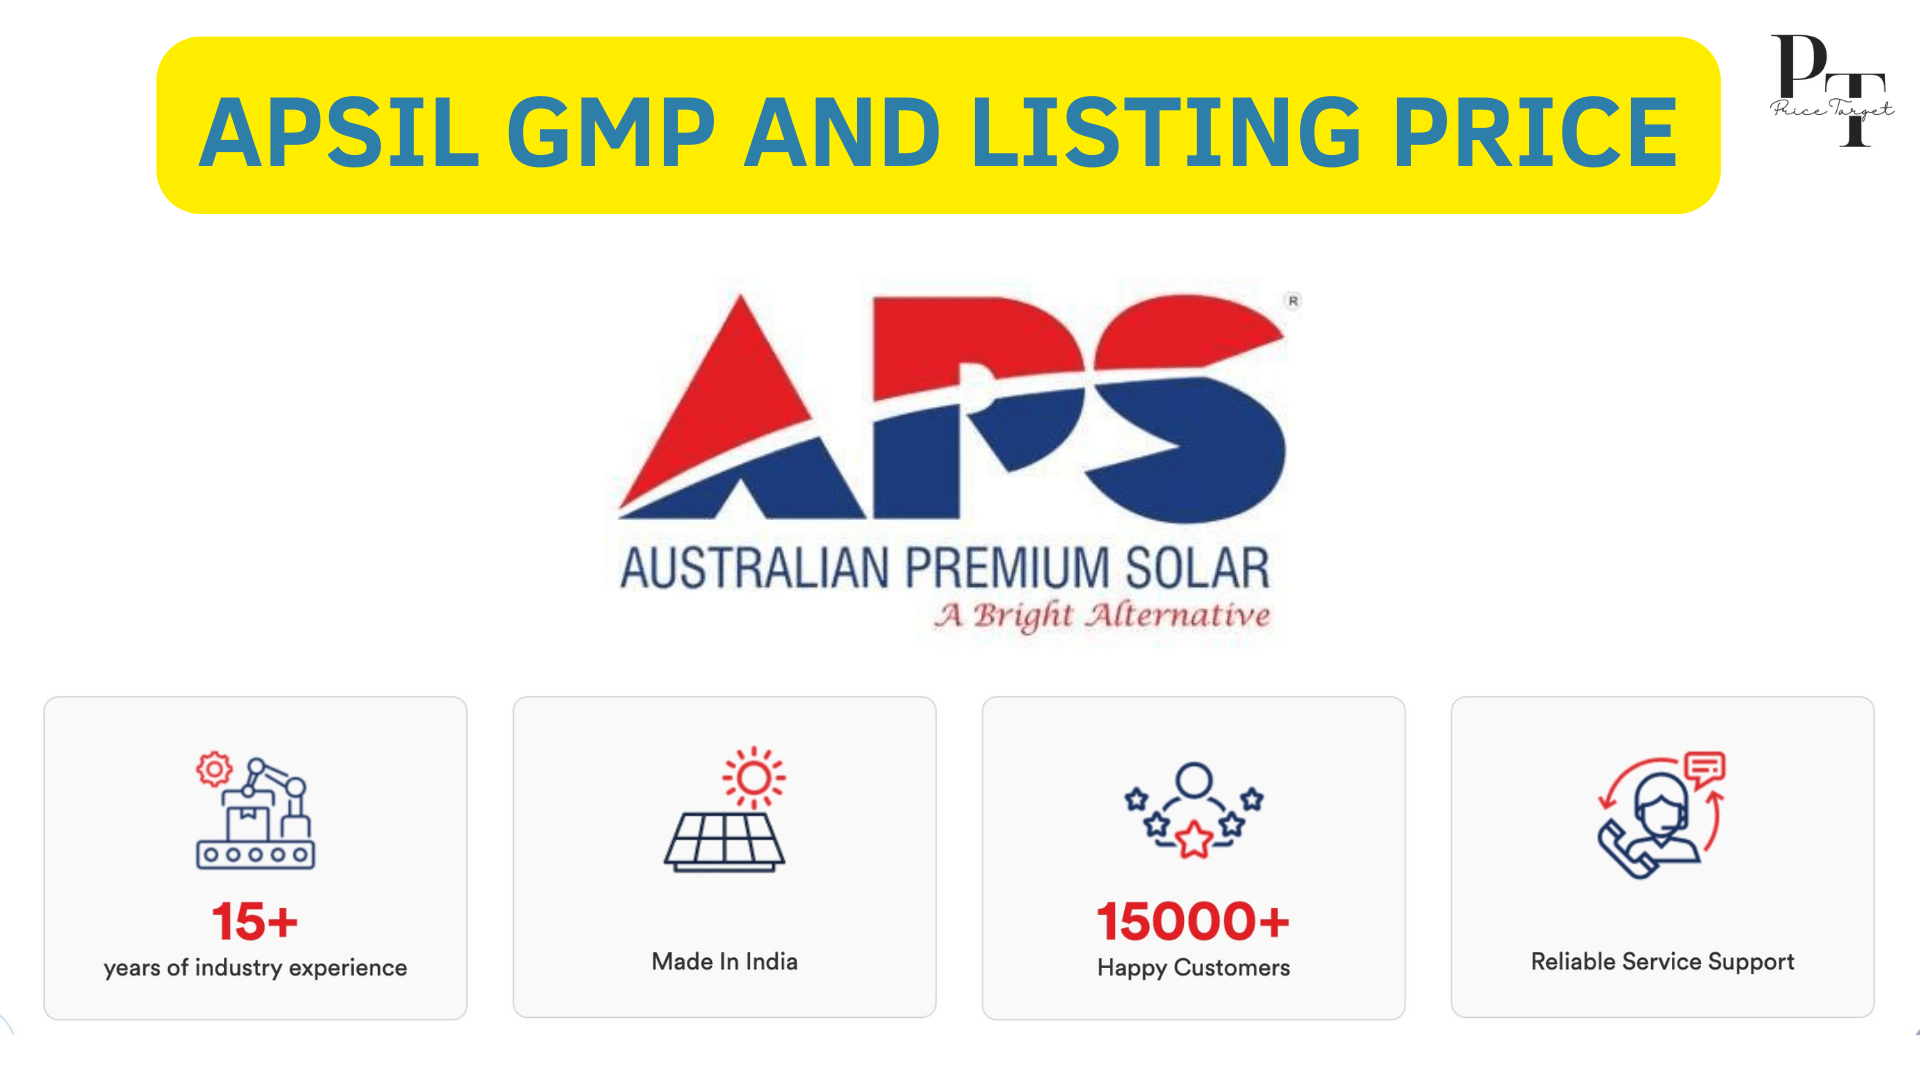 Australian Premium Solar GMP and Expected Listing Price